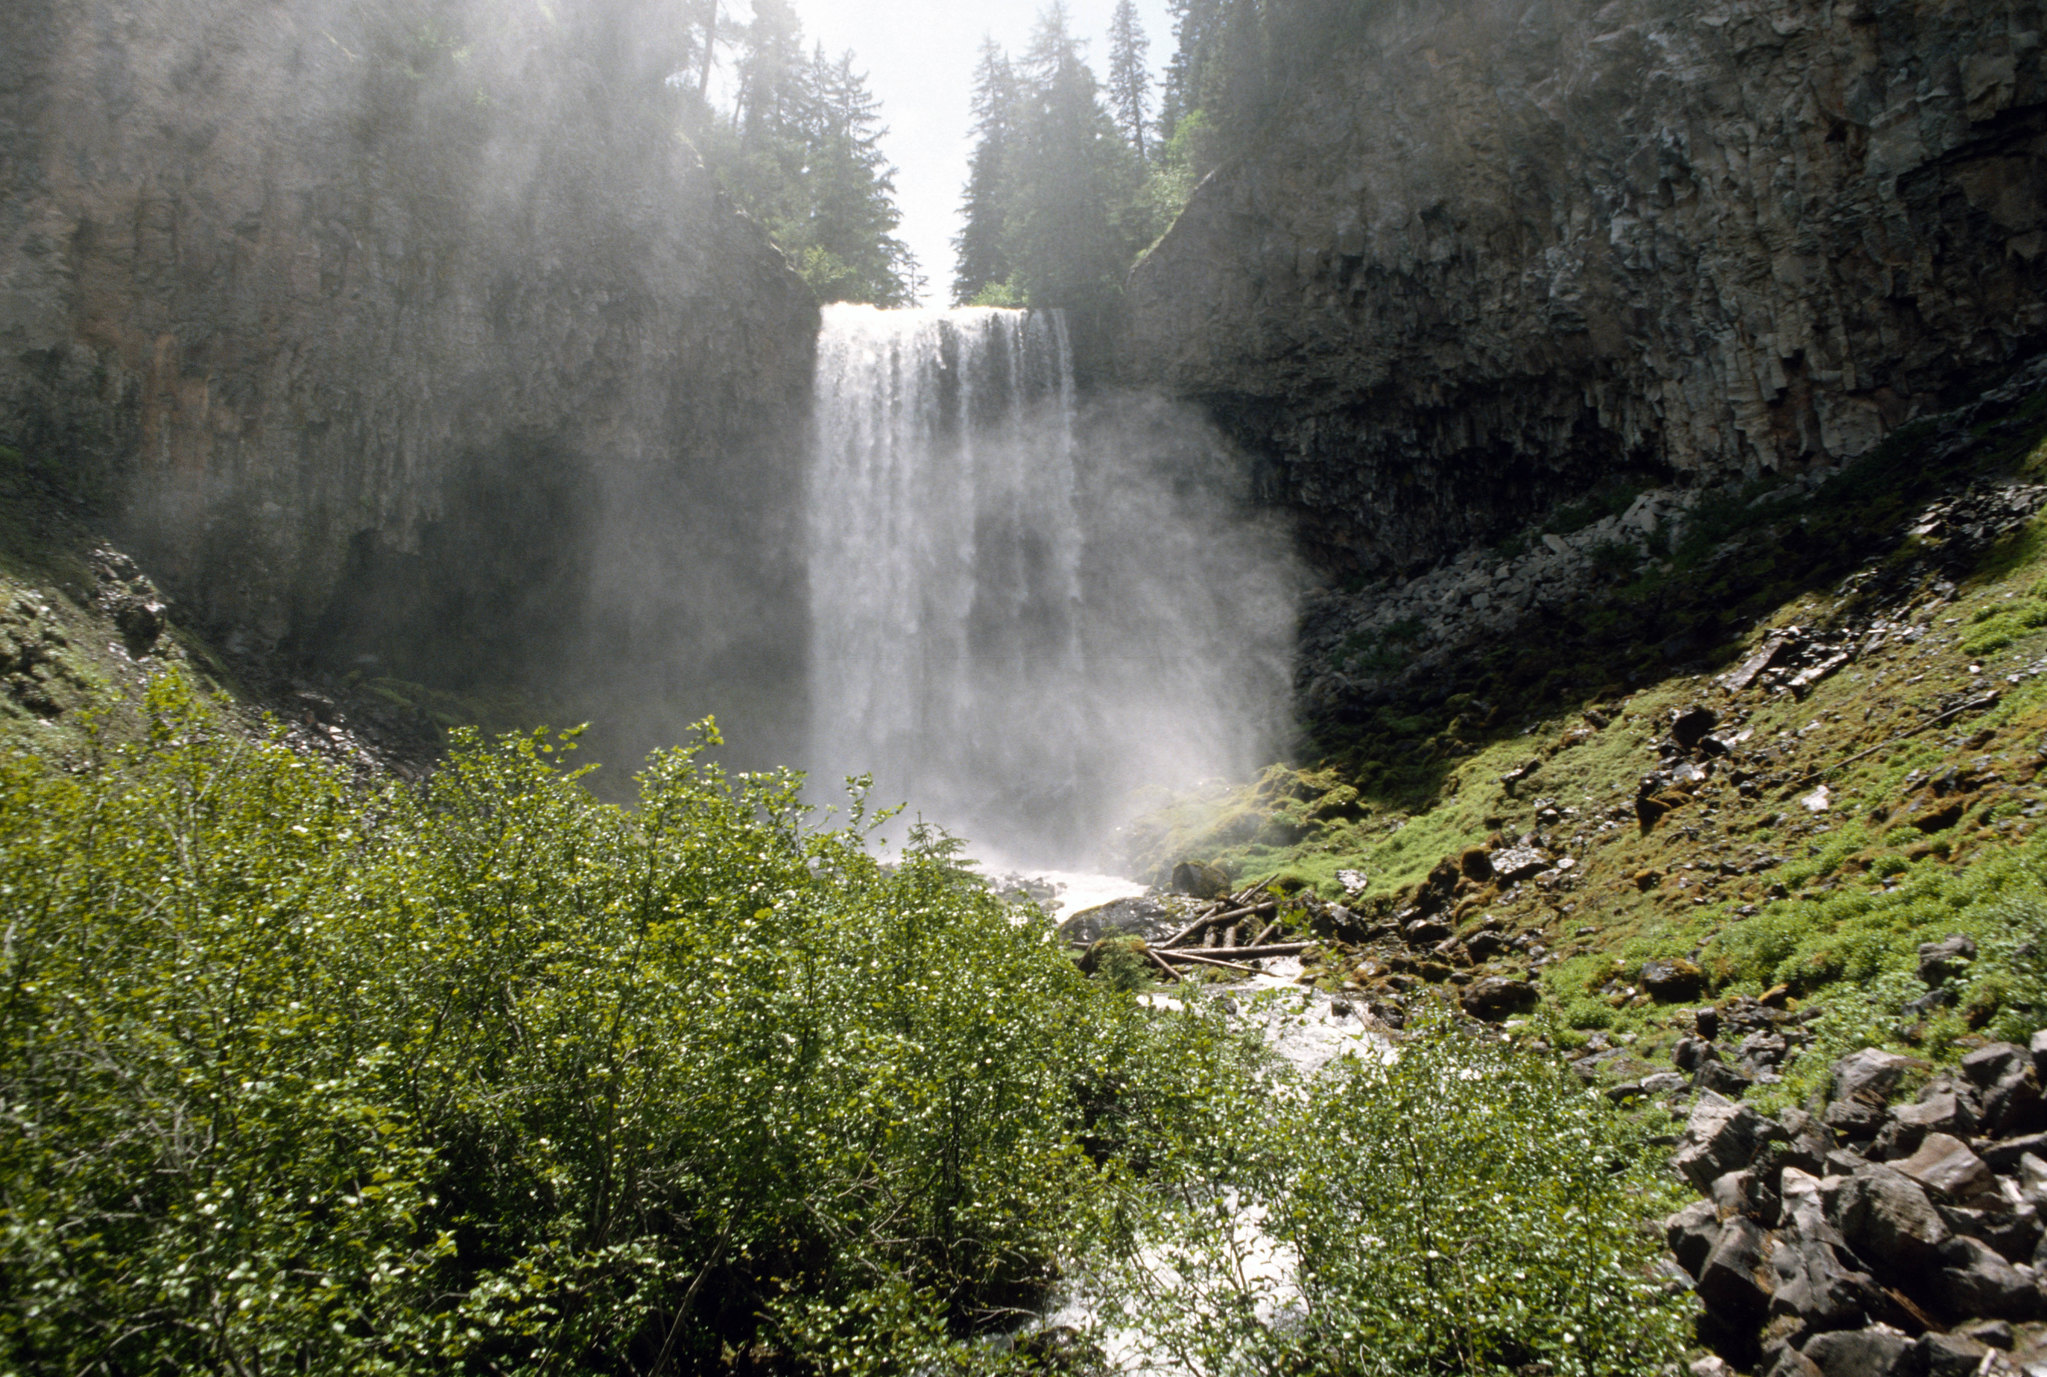 Tamanawas Falls, Mt Hood National Forest